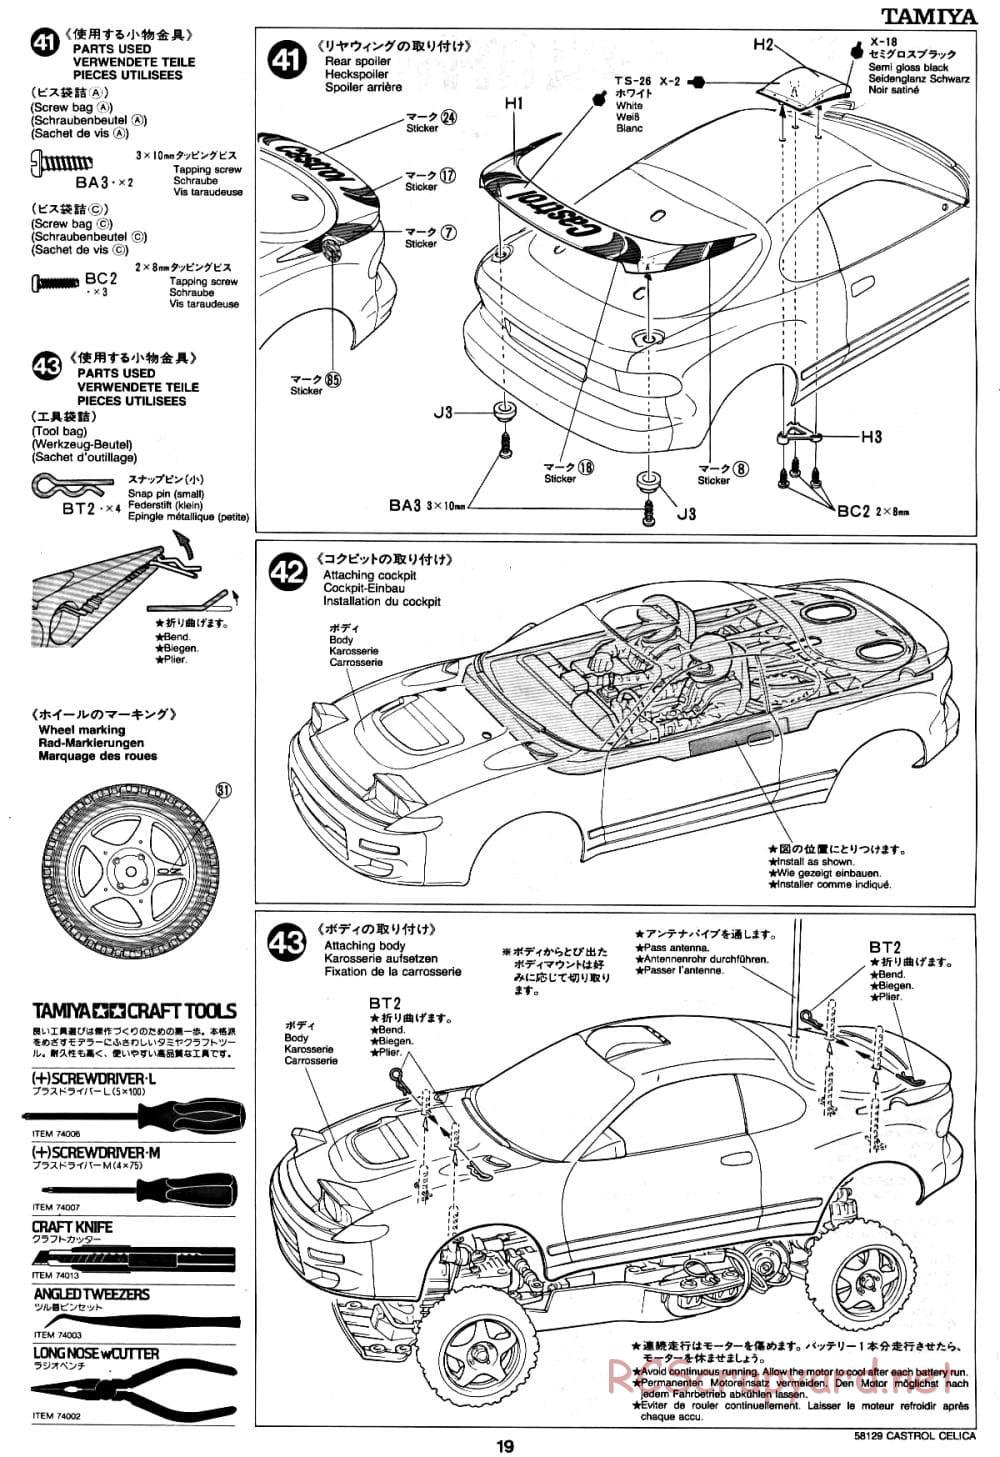 Tamiya - Castrol Celica 93 Monte-Carlo - TA-02 Chassis - Manual - Page 19